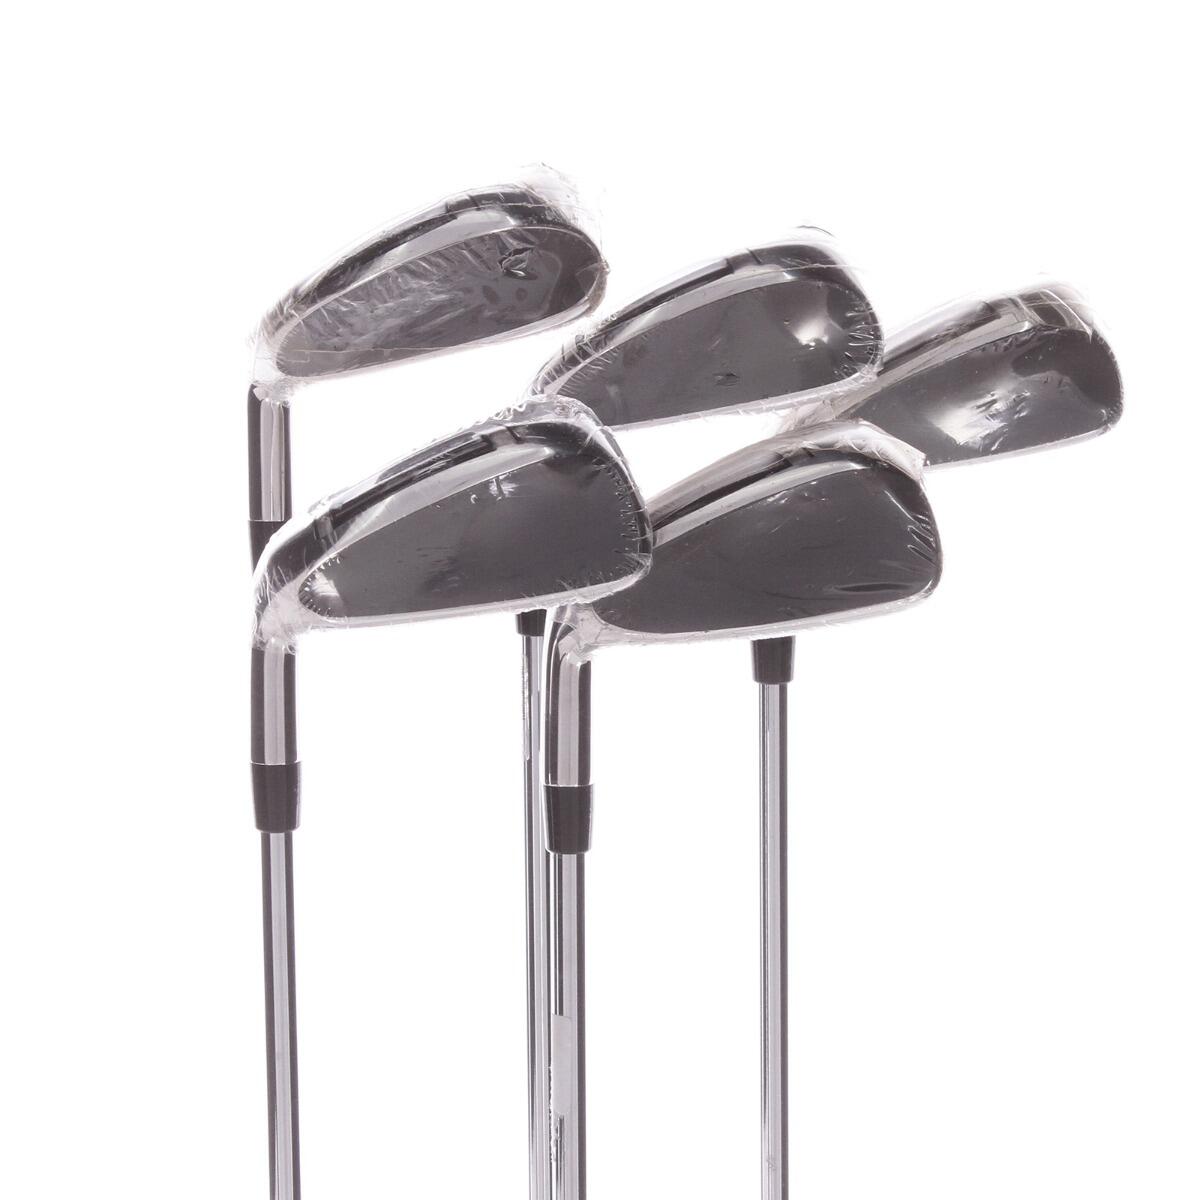 CLEVELAND GOLF USED - Iron Set 5-9-iron Cleveland Launcher HB Steel Shaft Left Handed - GRADE A